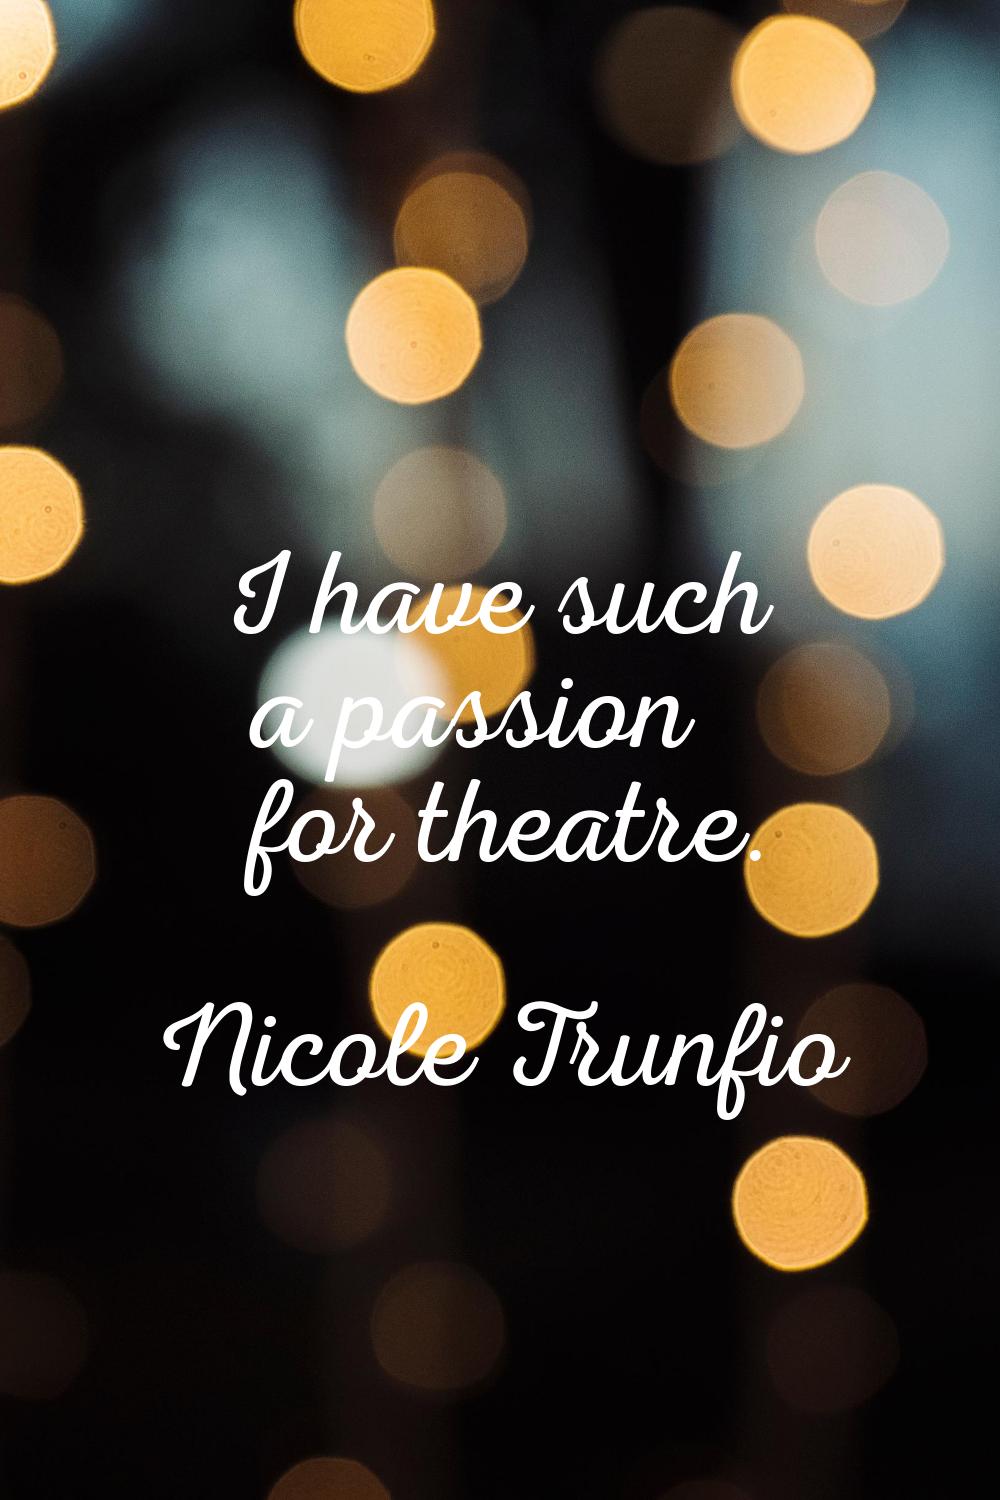 I have such a passion for theatre.